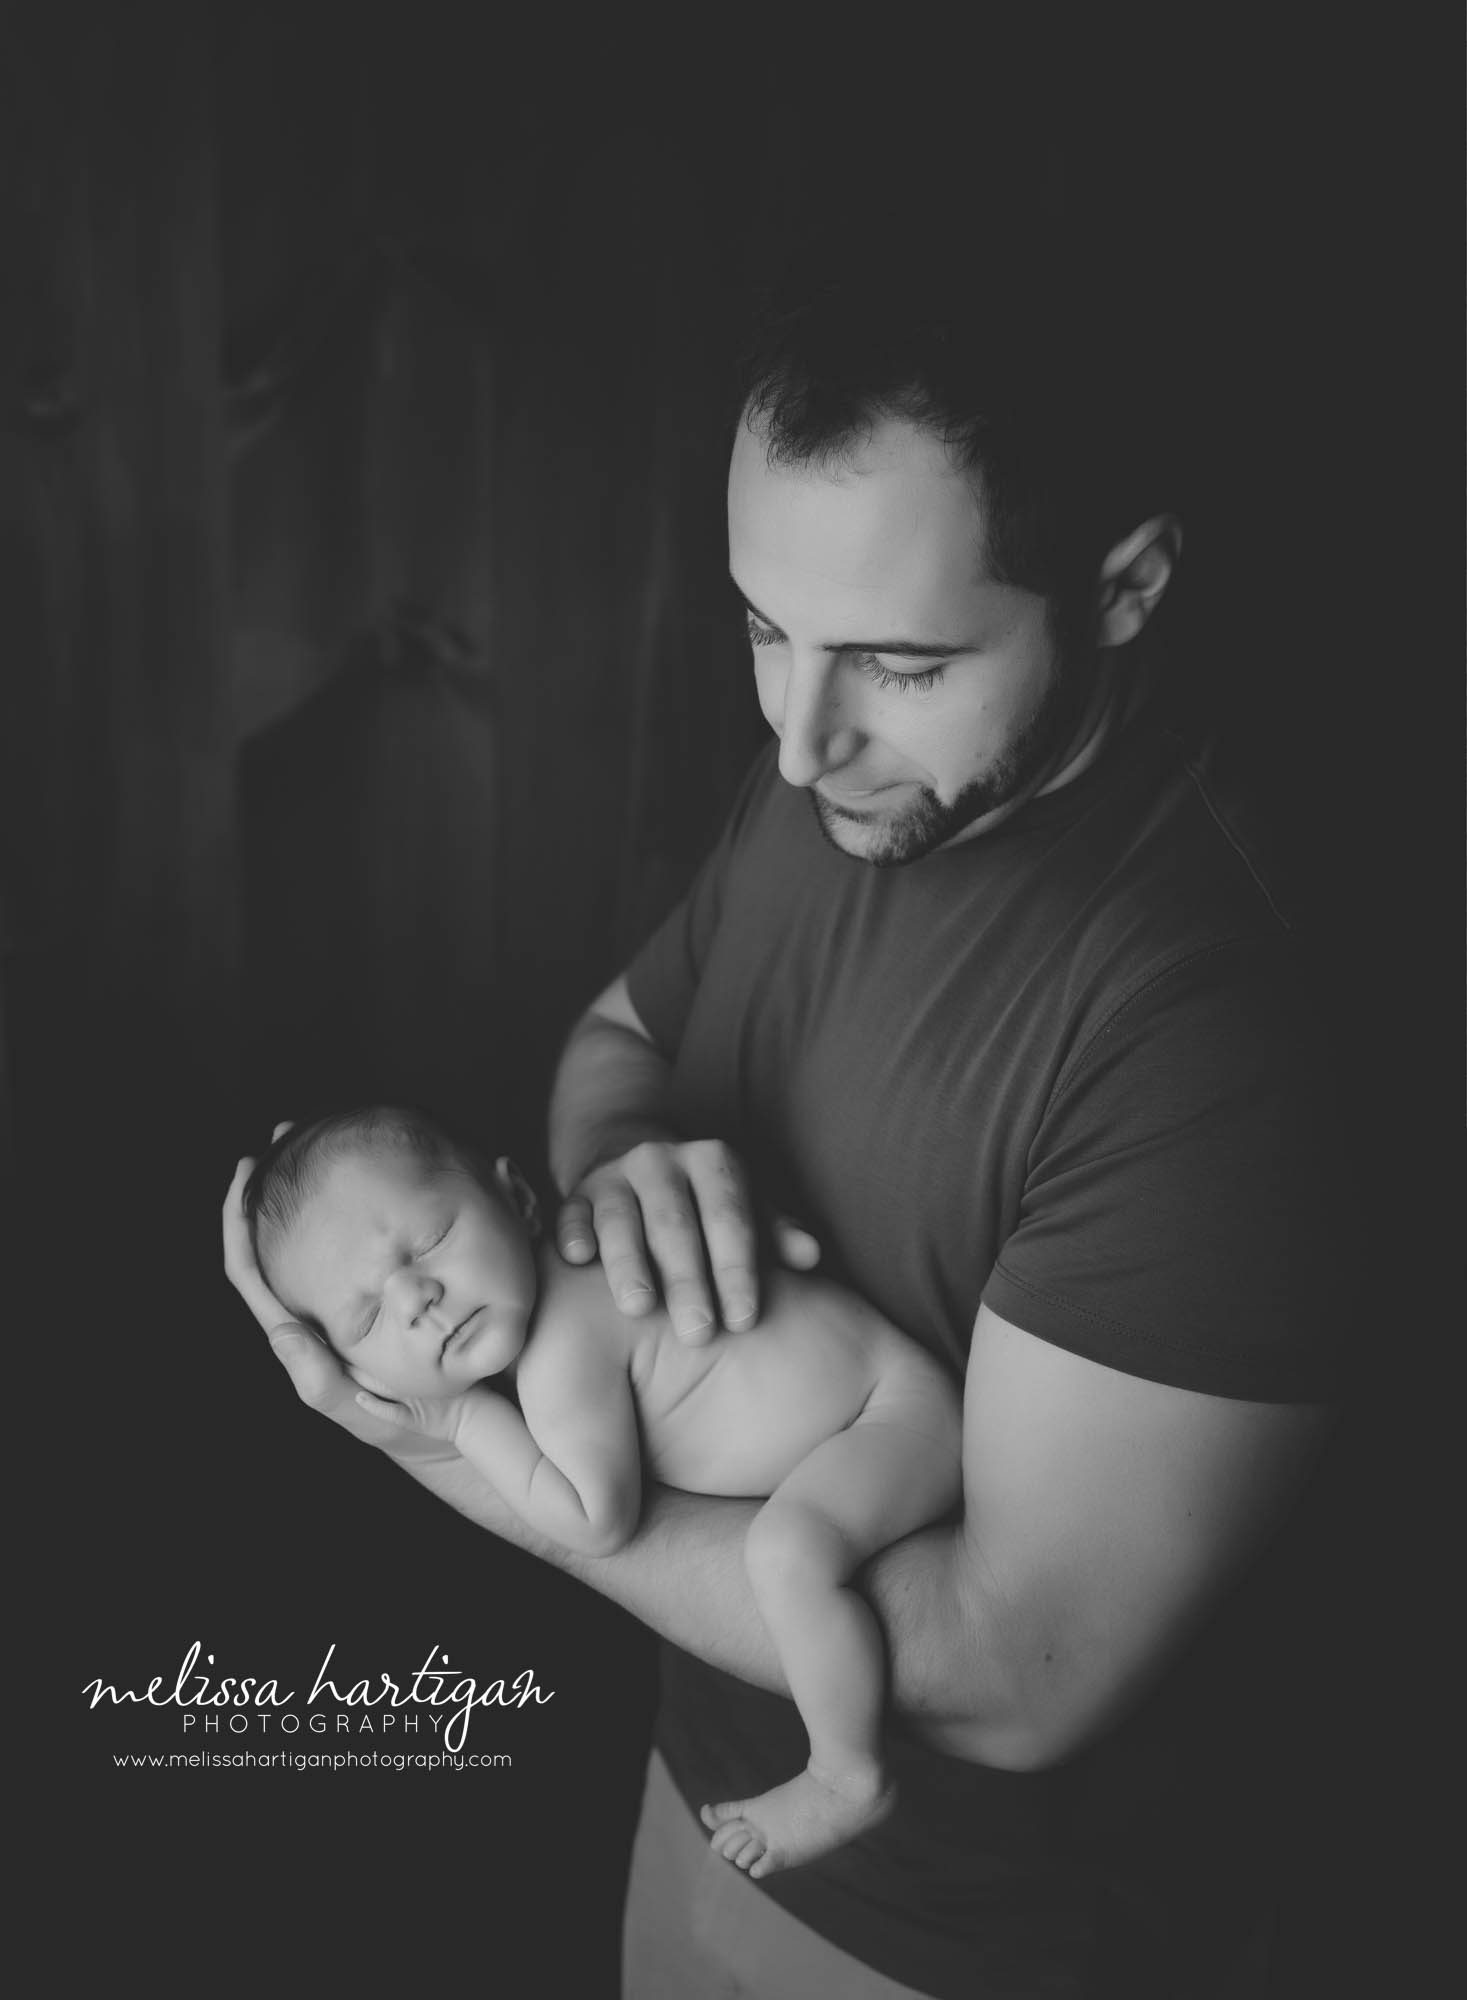 dad holding newborn son on arm in parent photo newborn baby photography session CT photographer